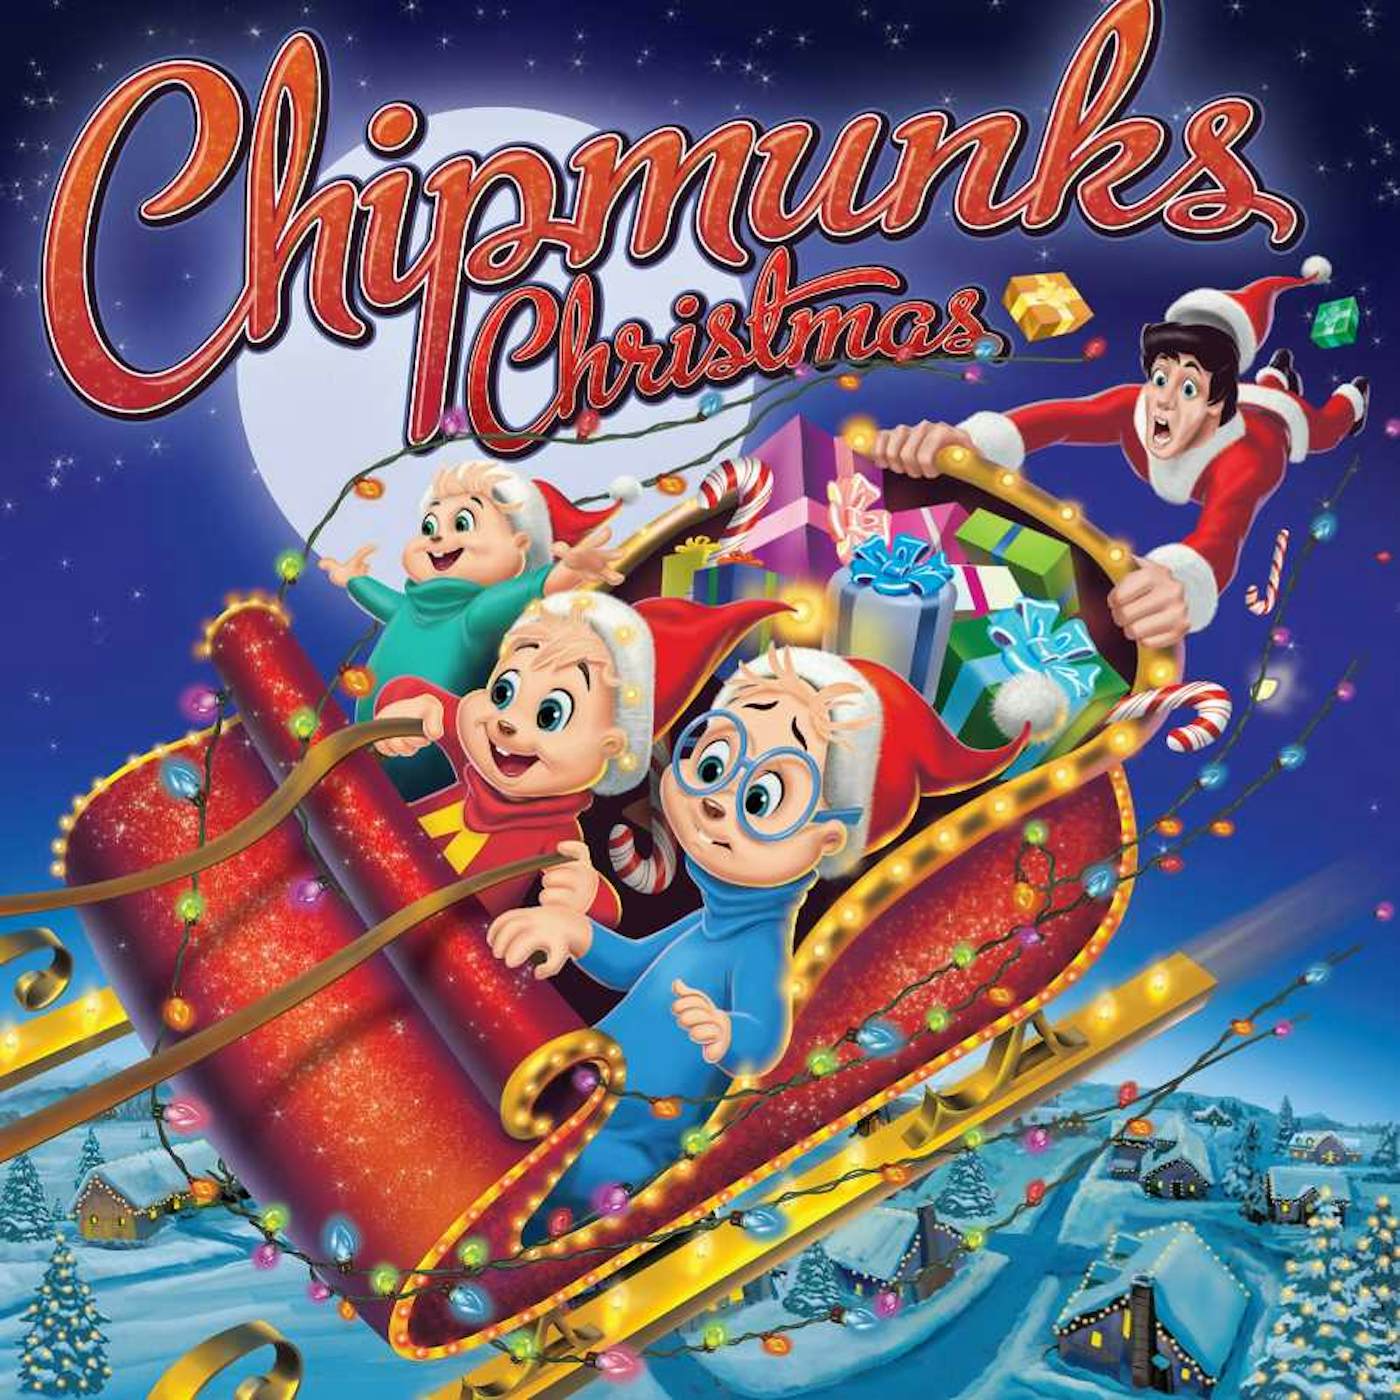 Alvin and the Chipmunks Christmas CD